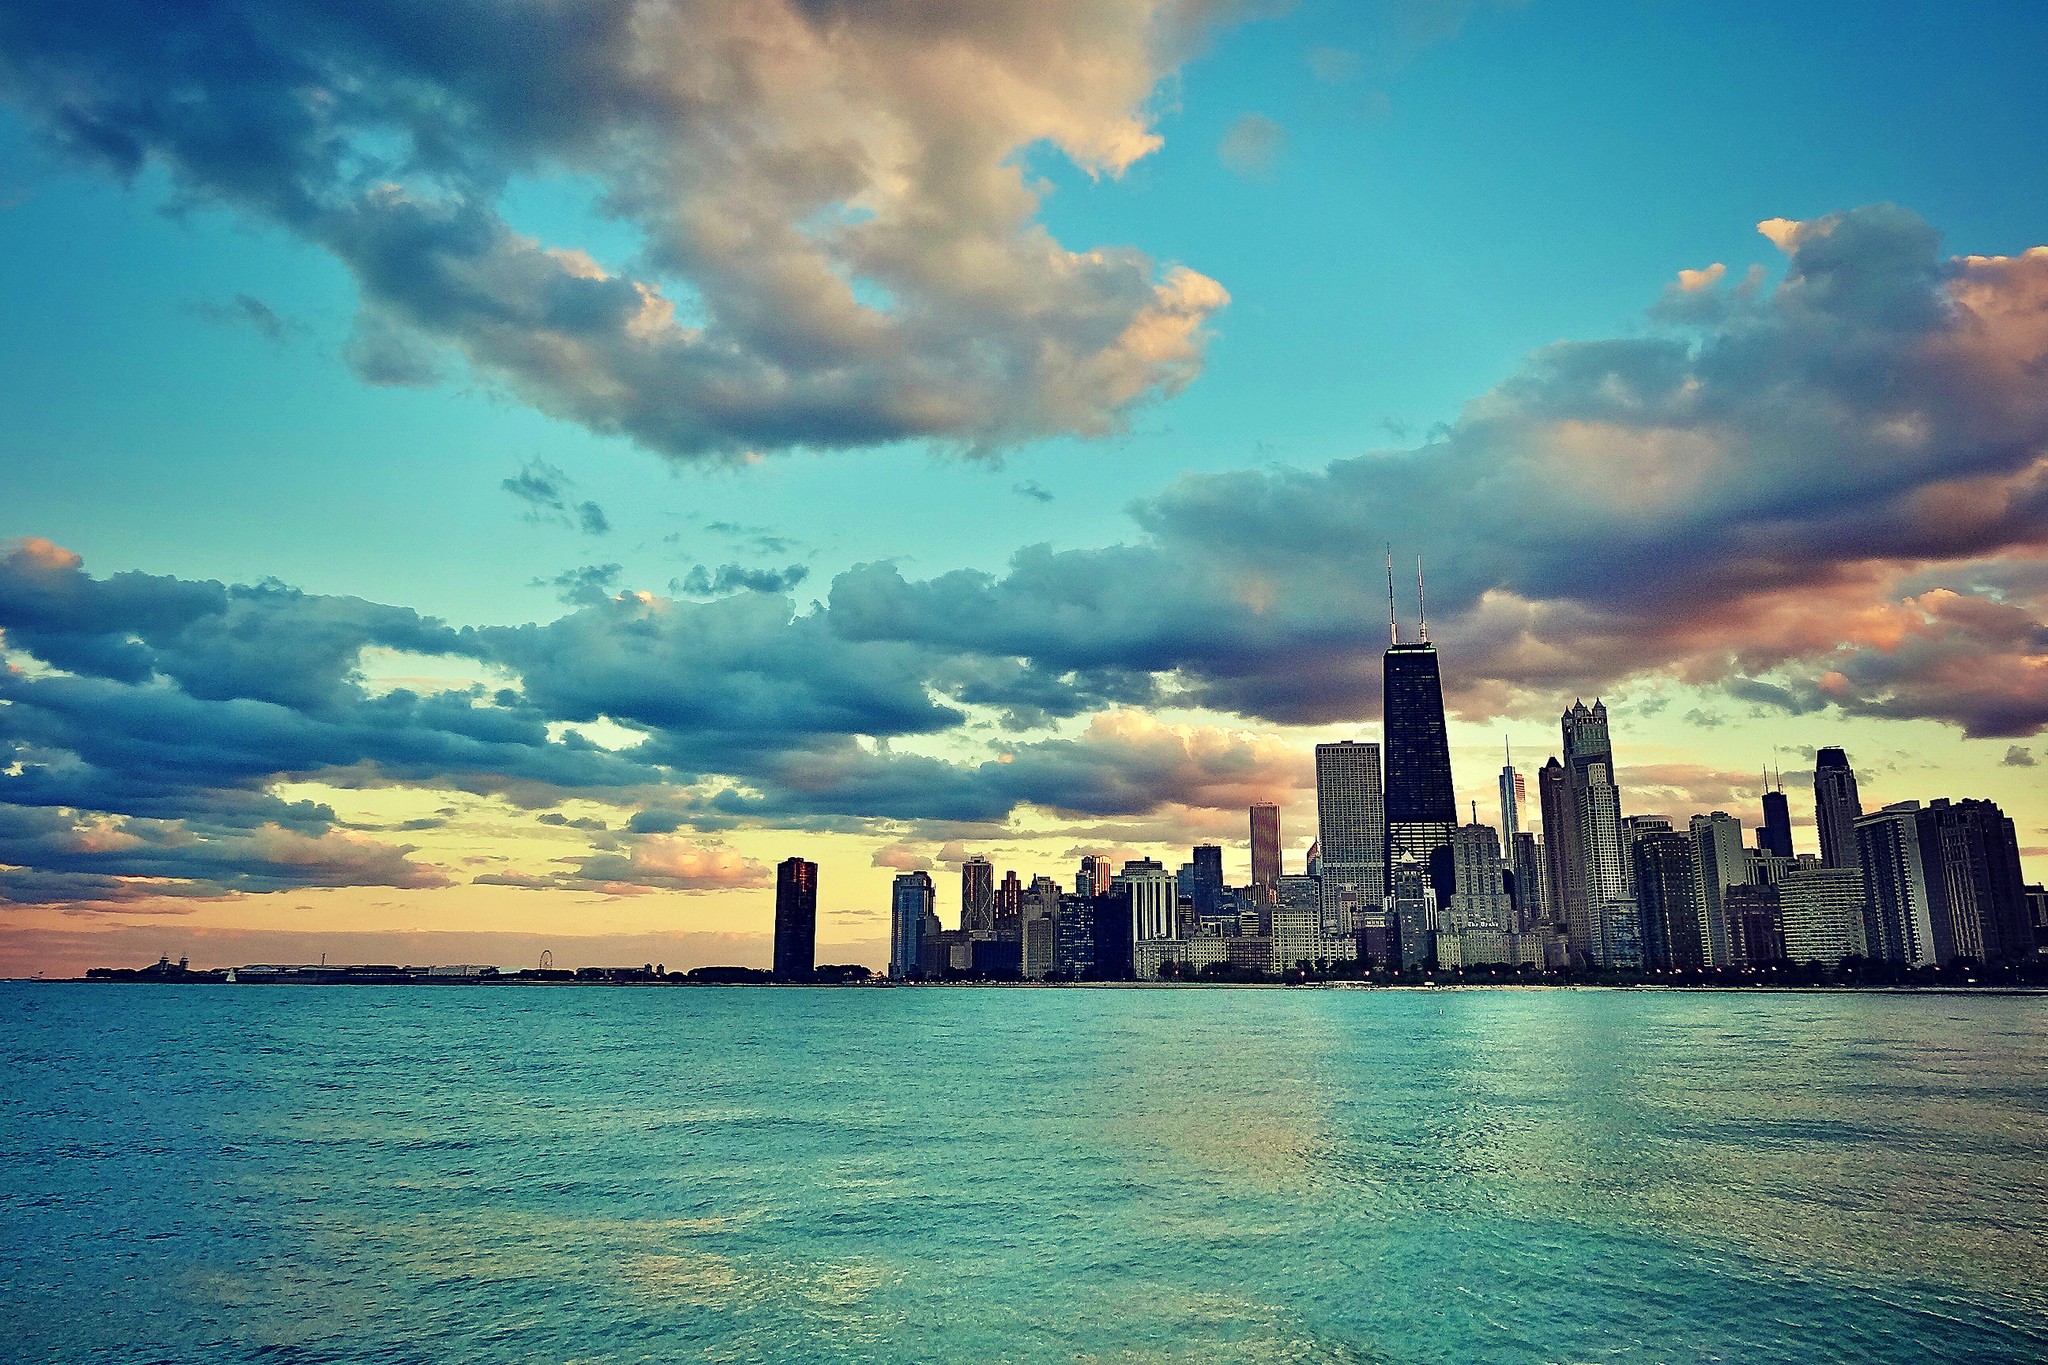 General 2048x1365 USA skyline clouds Chicago cityscape